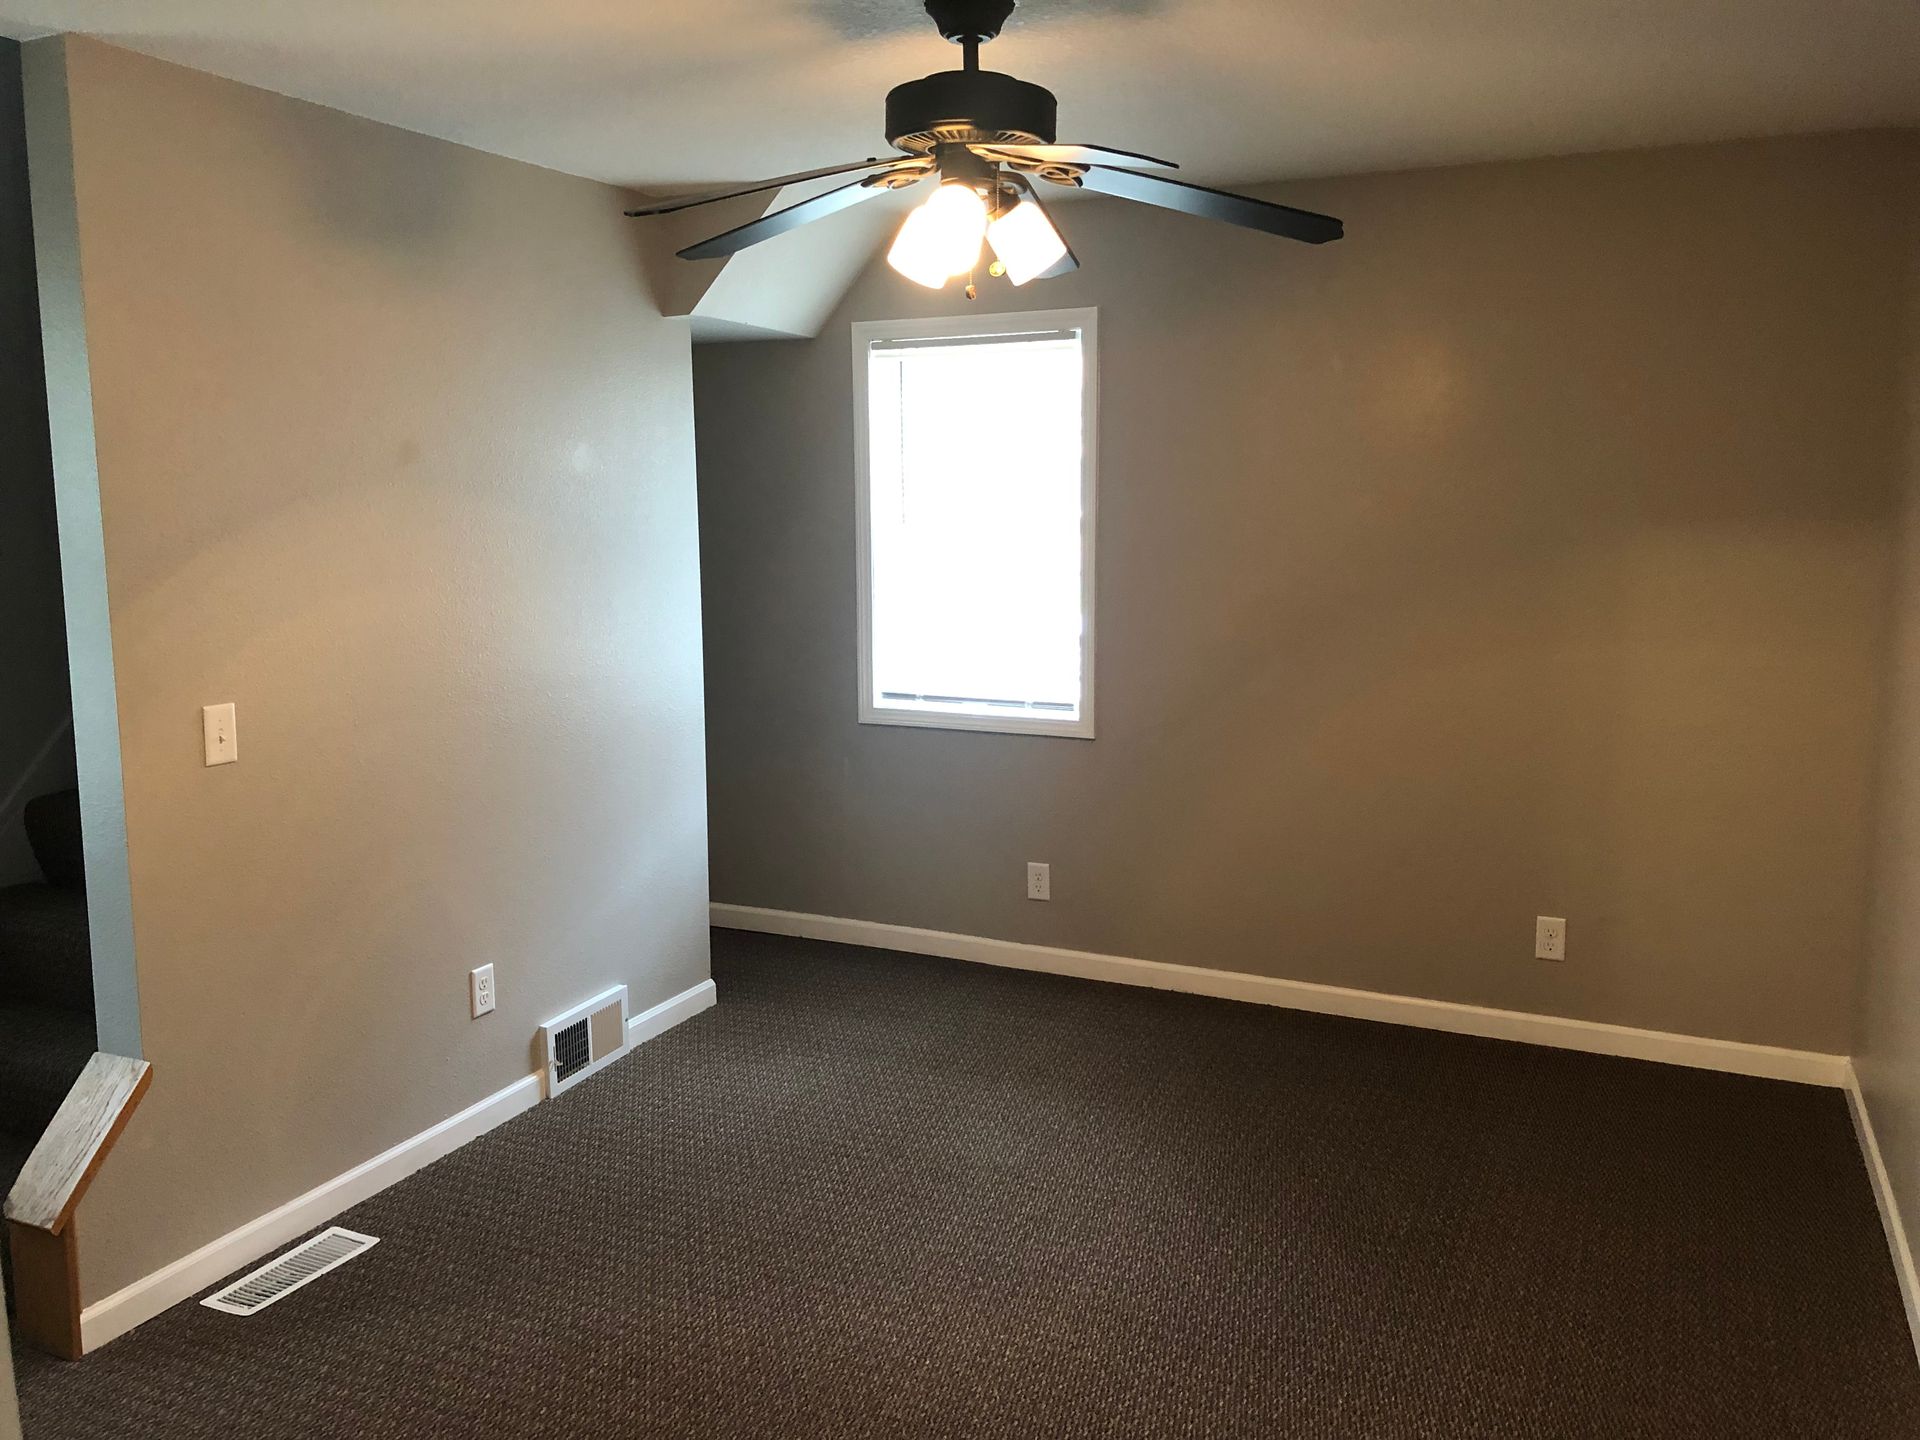 An empty living room with a ceiling fan and a window.